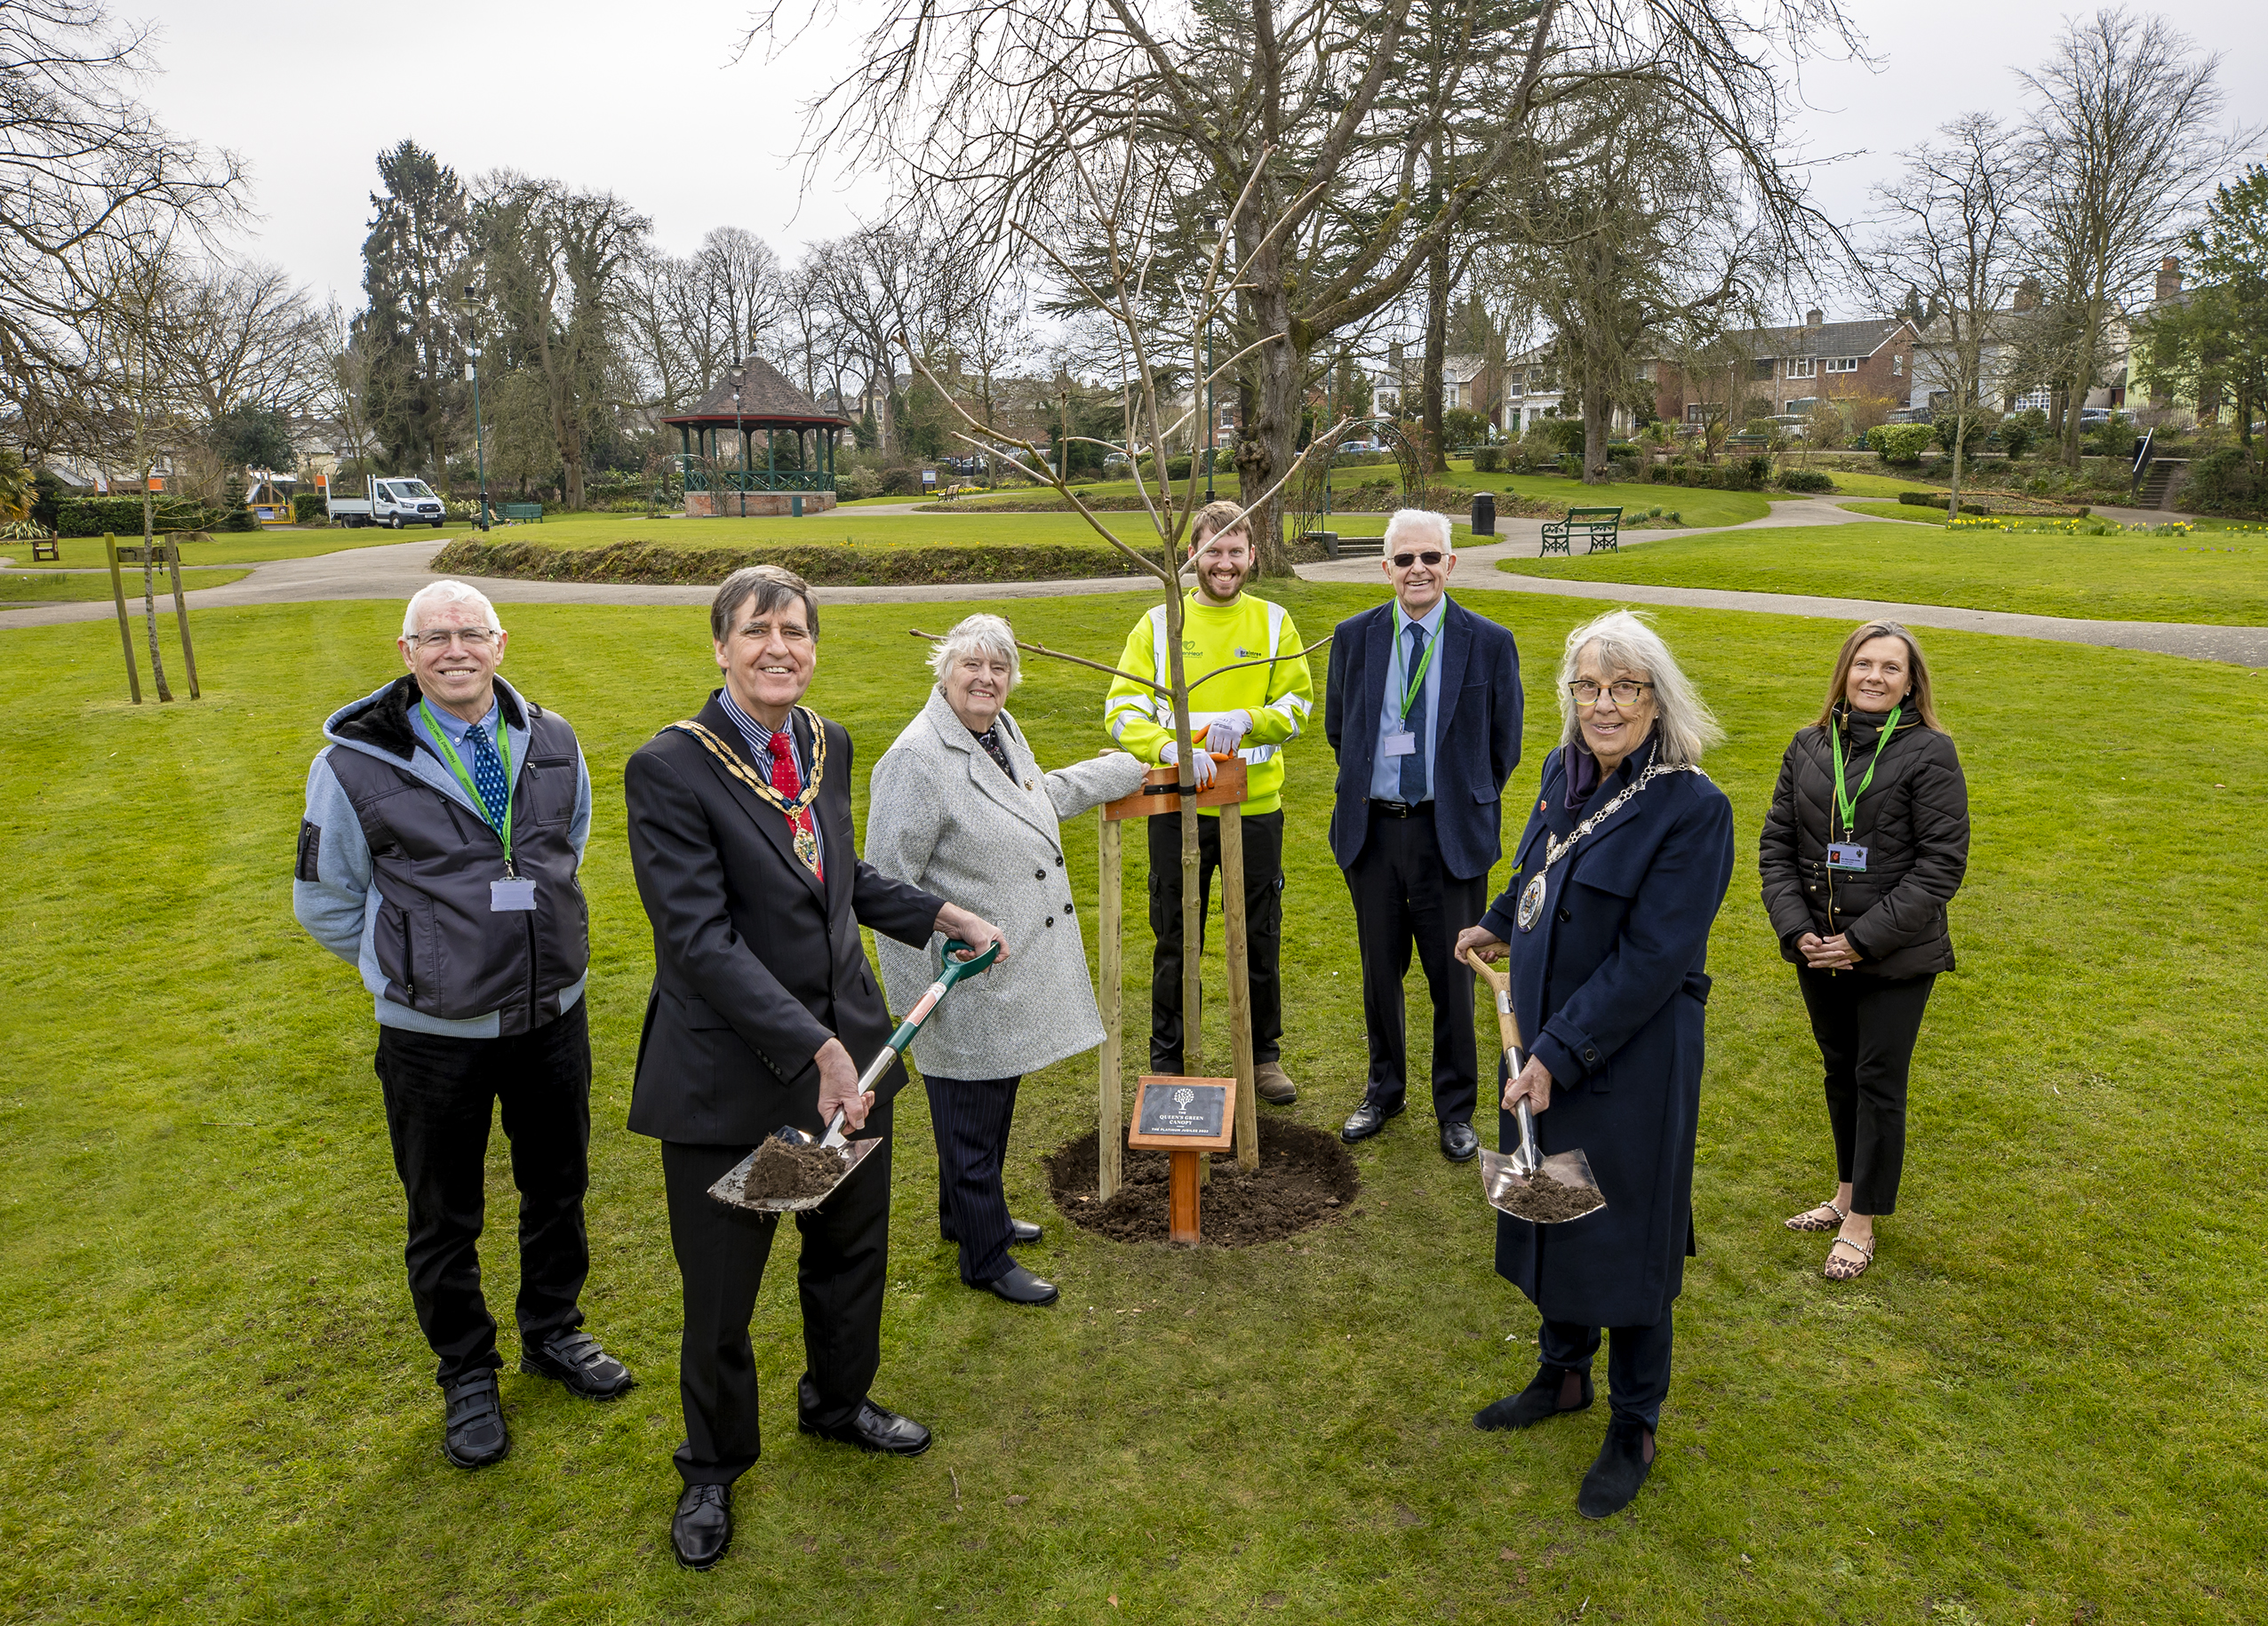 Halstead public gardens photo of tree planting for the Queens Platinum Jubilee with Council members and town council representatives